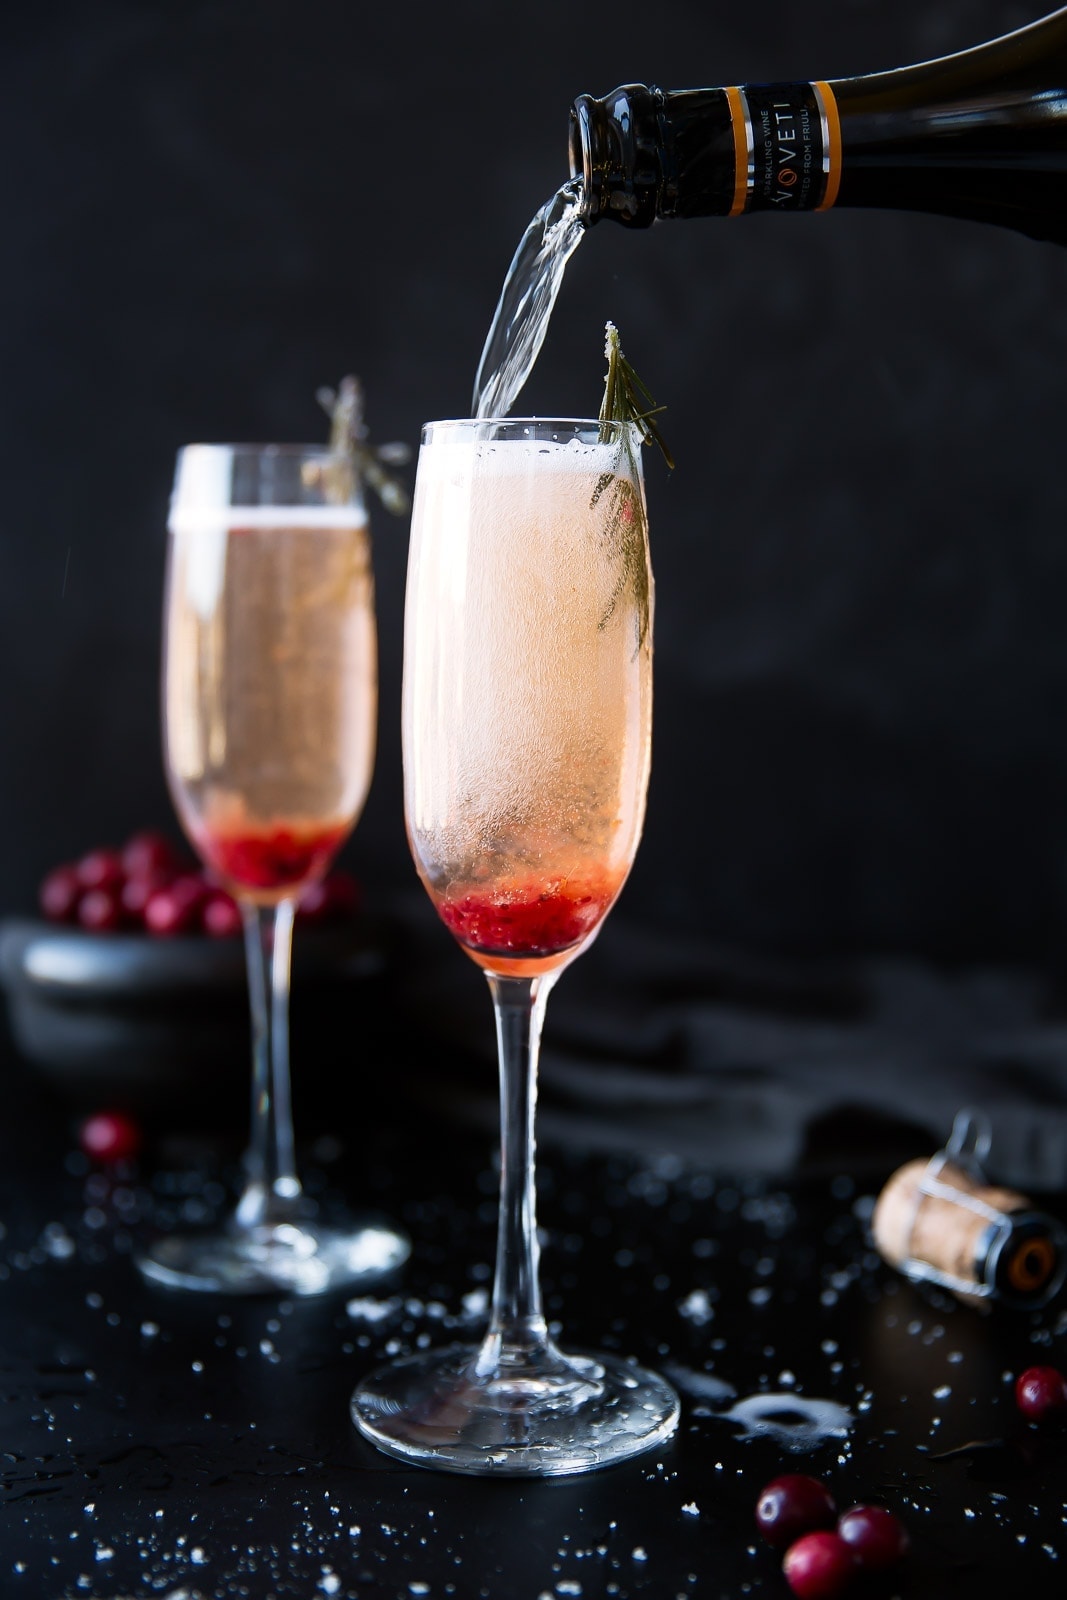 Almost as beautiful as it is easy, this Cranberry Orange Prosecco Cocktail with candied rosemary is sure to please!